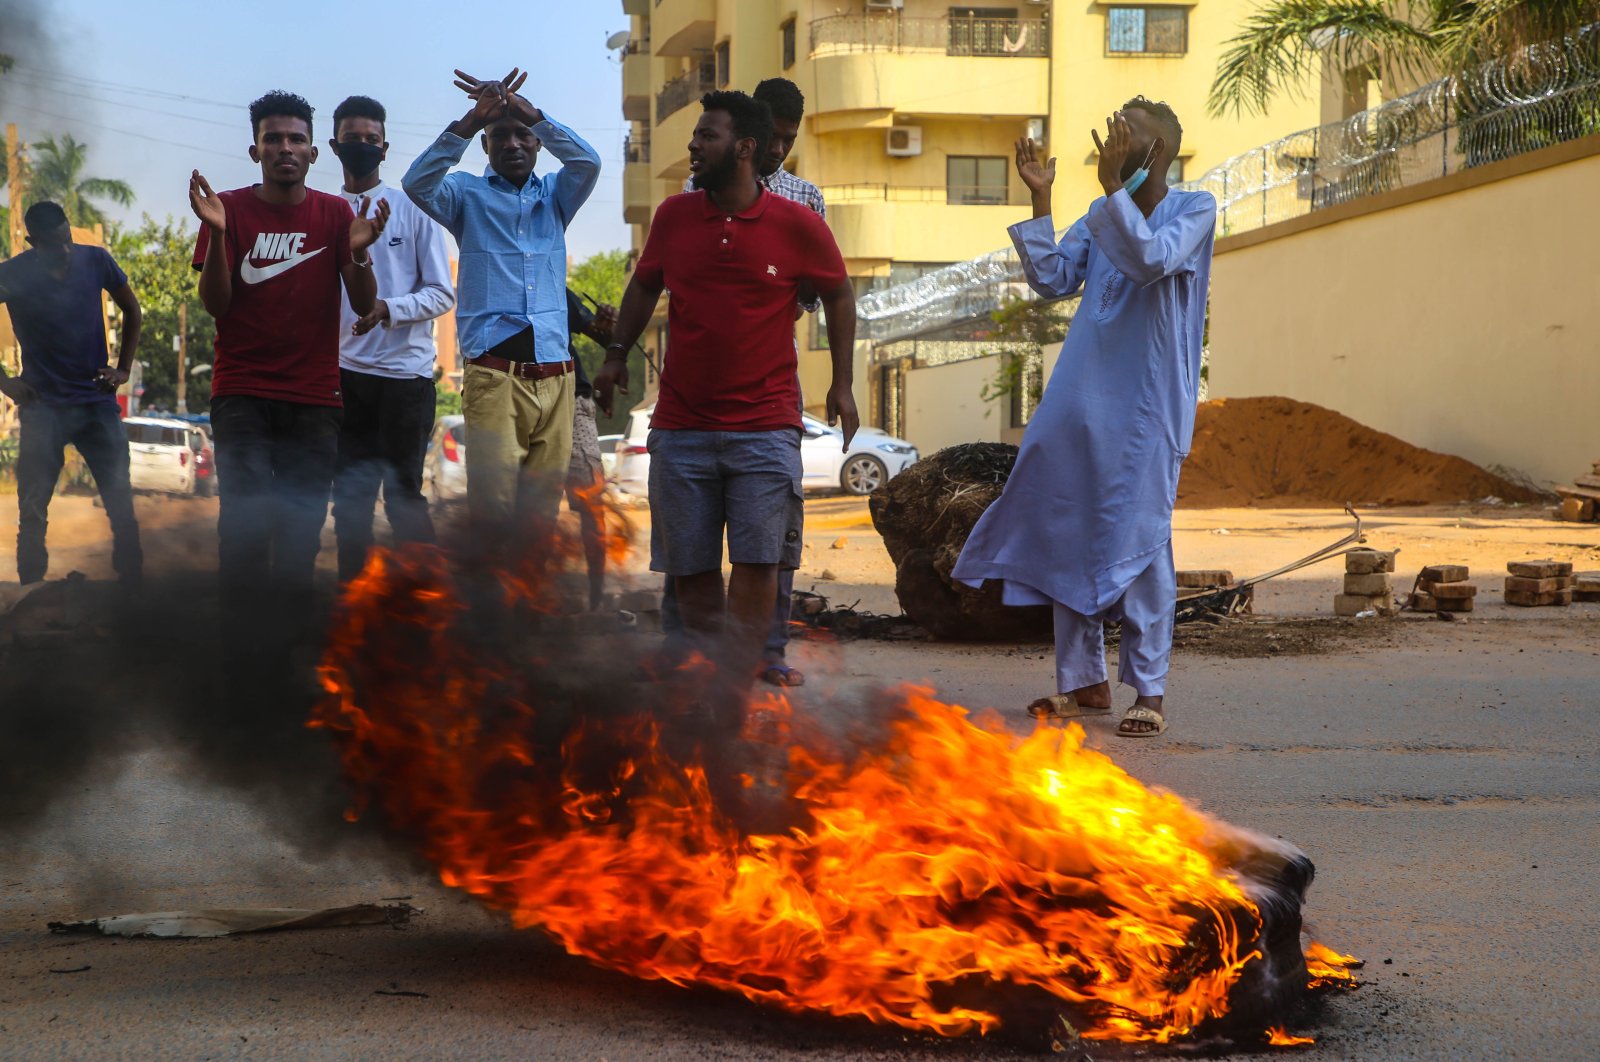 Sudanese protesters chant near burning tires during a demonstration in the capital Khartoum, Sudan, Oct. 25, 2021. (EPA Photo)